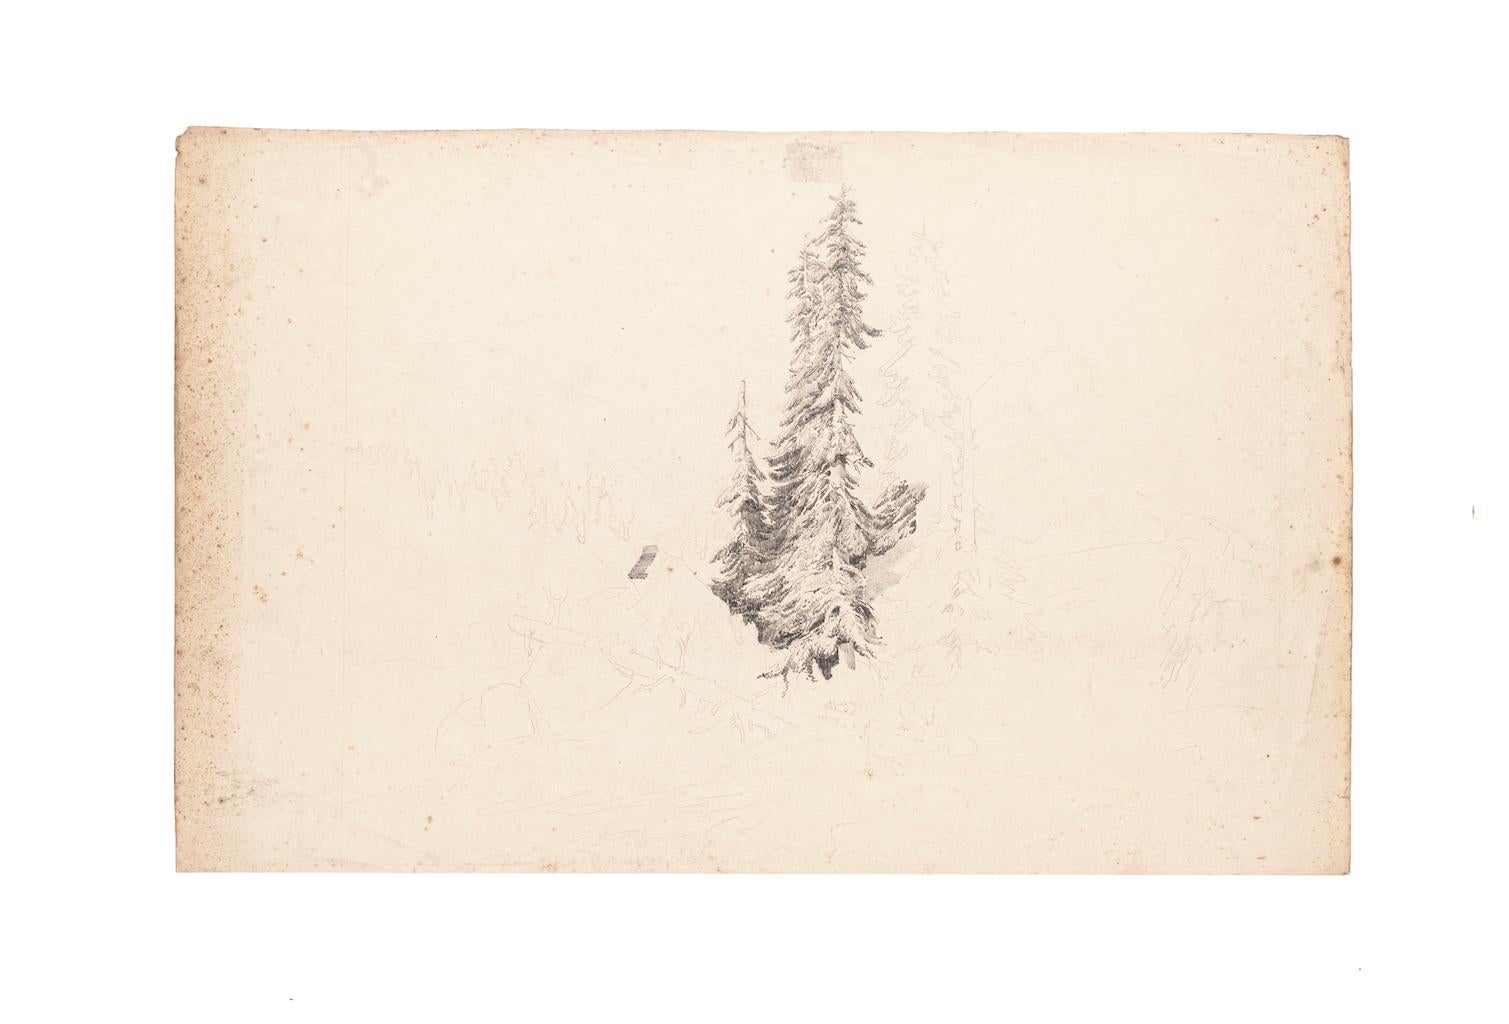 Unknown Landscape Art - Sole Tree - Drawing in Pencil on Paper - 20th Century